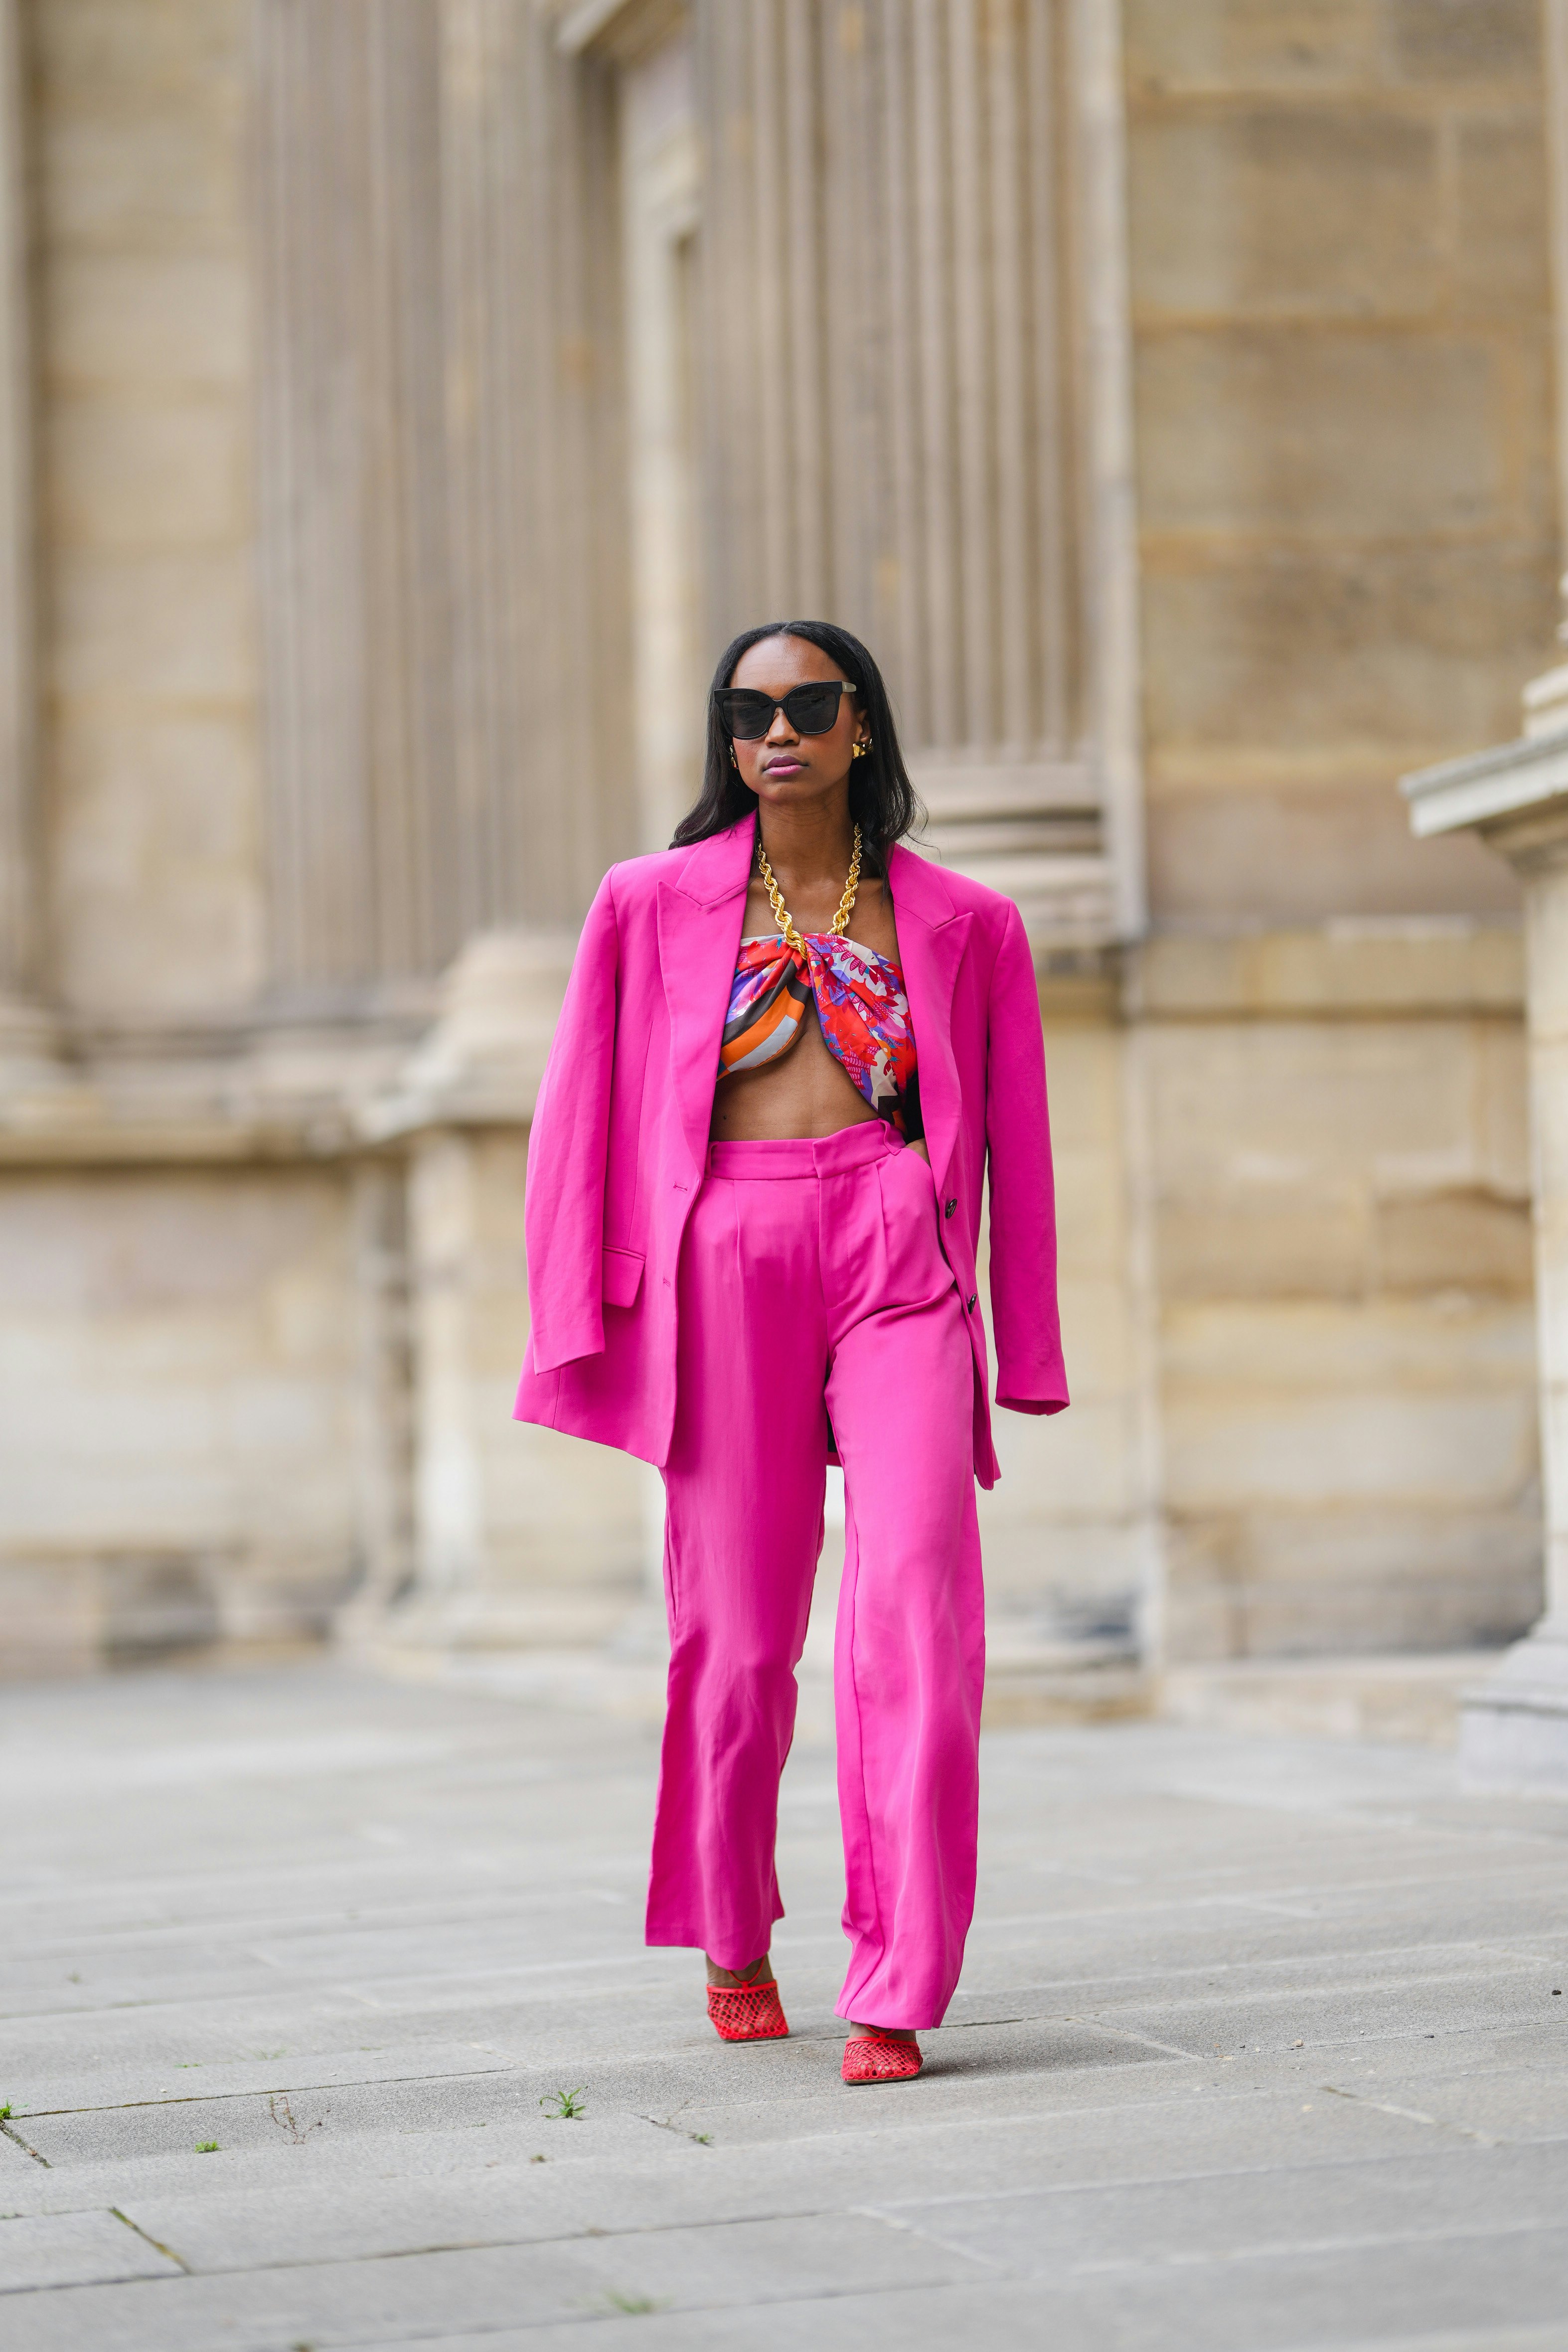 Classy Hot Pink Outfit Ideas To Wear No ...